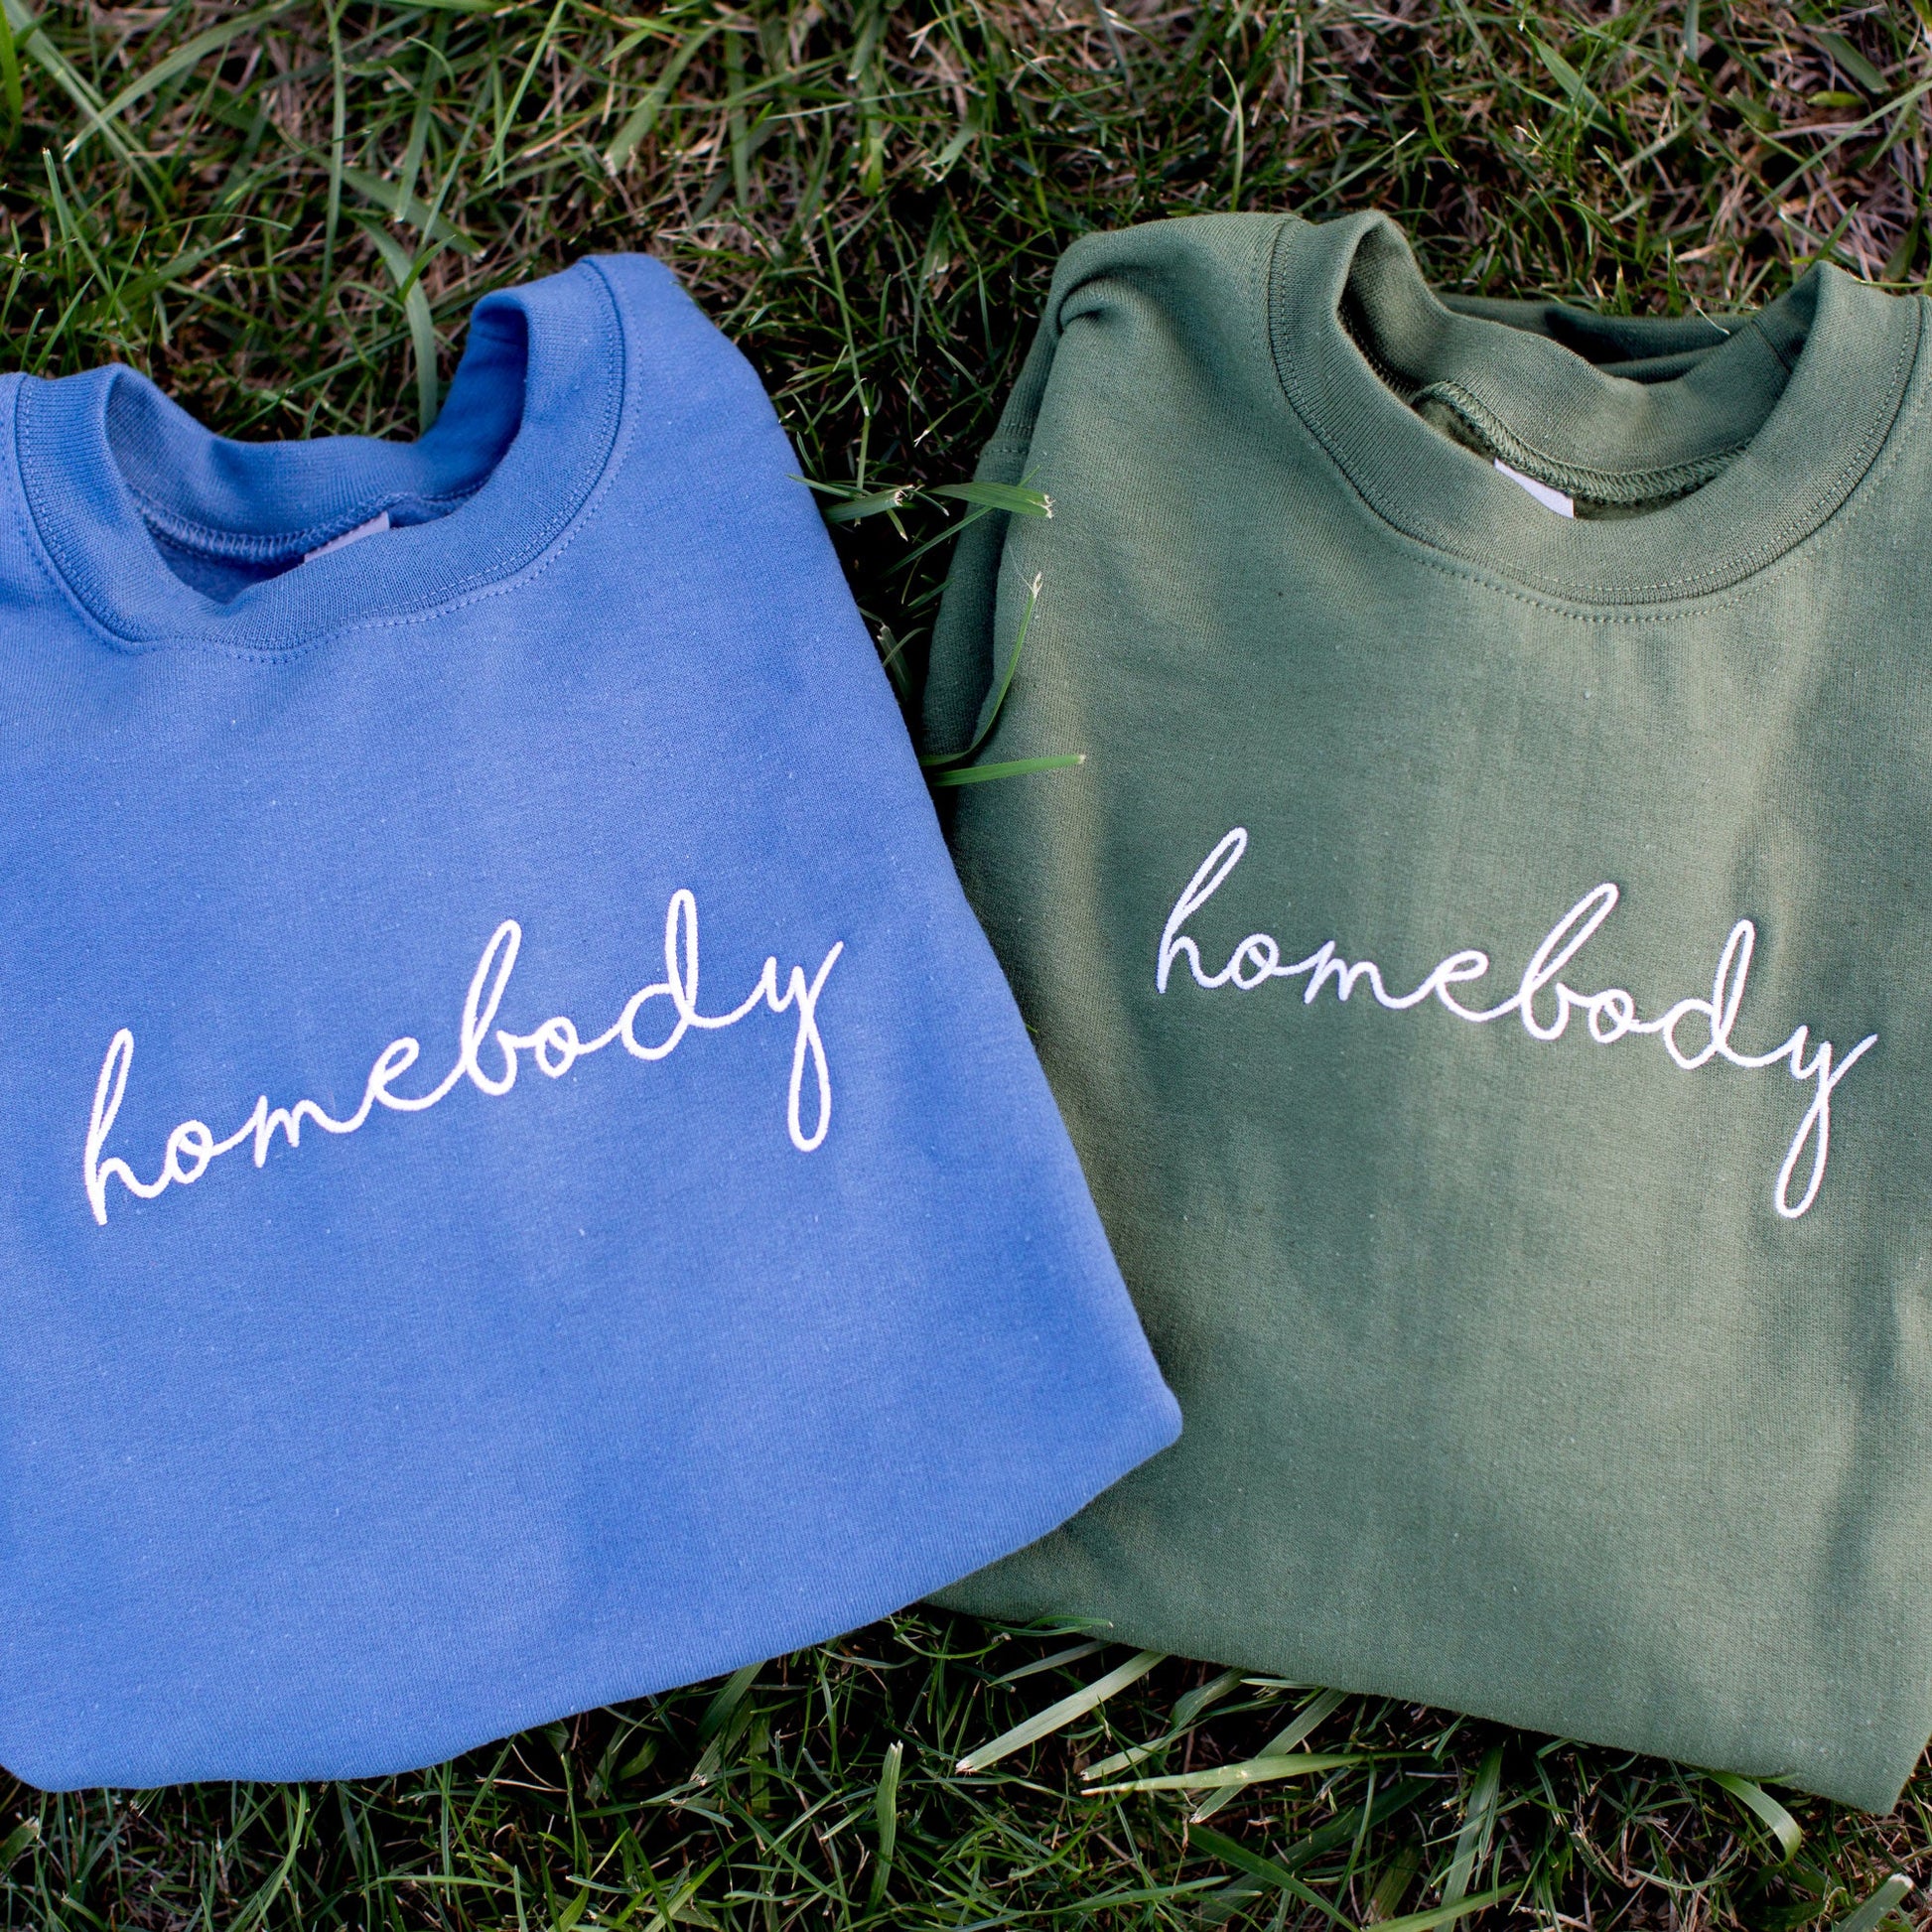 indigo and olive green sweatshirt with homebody embroidered in white thread and a script font folded and laying on grass